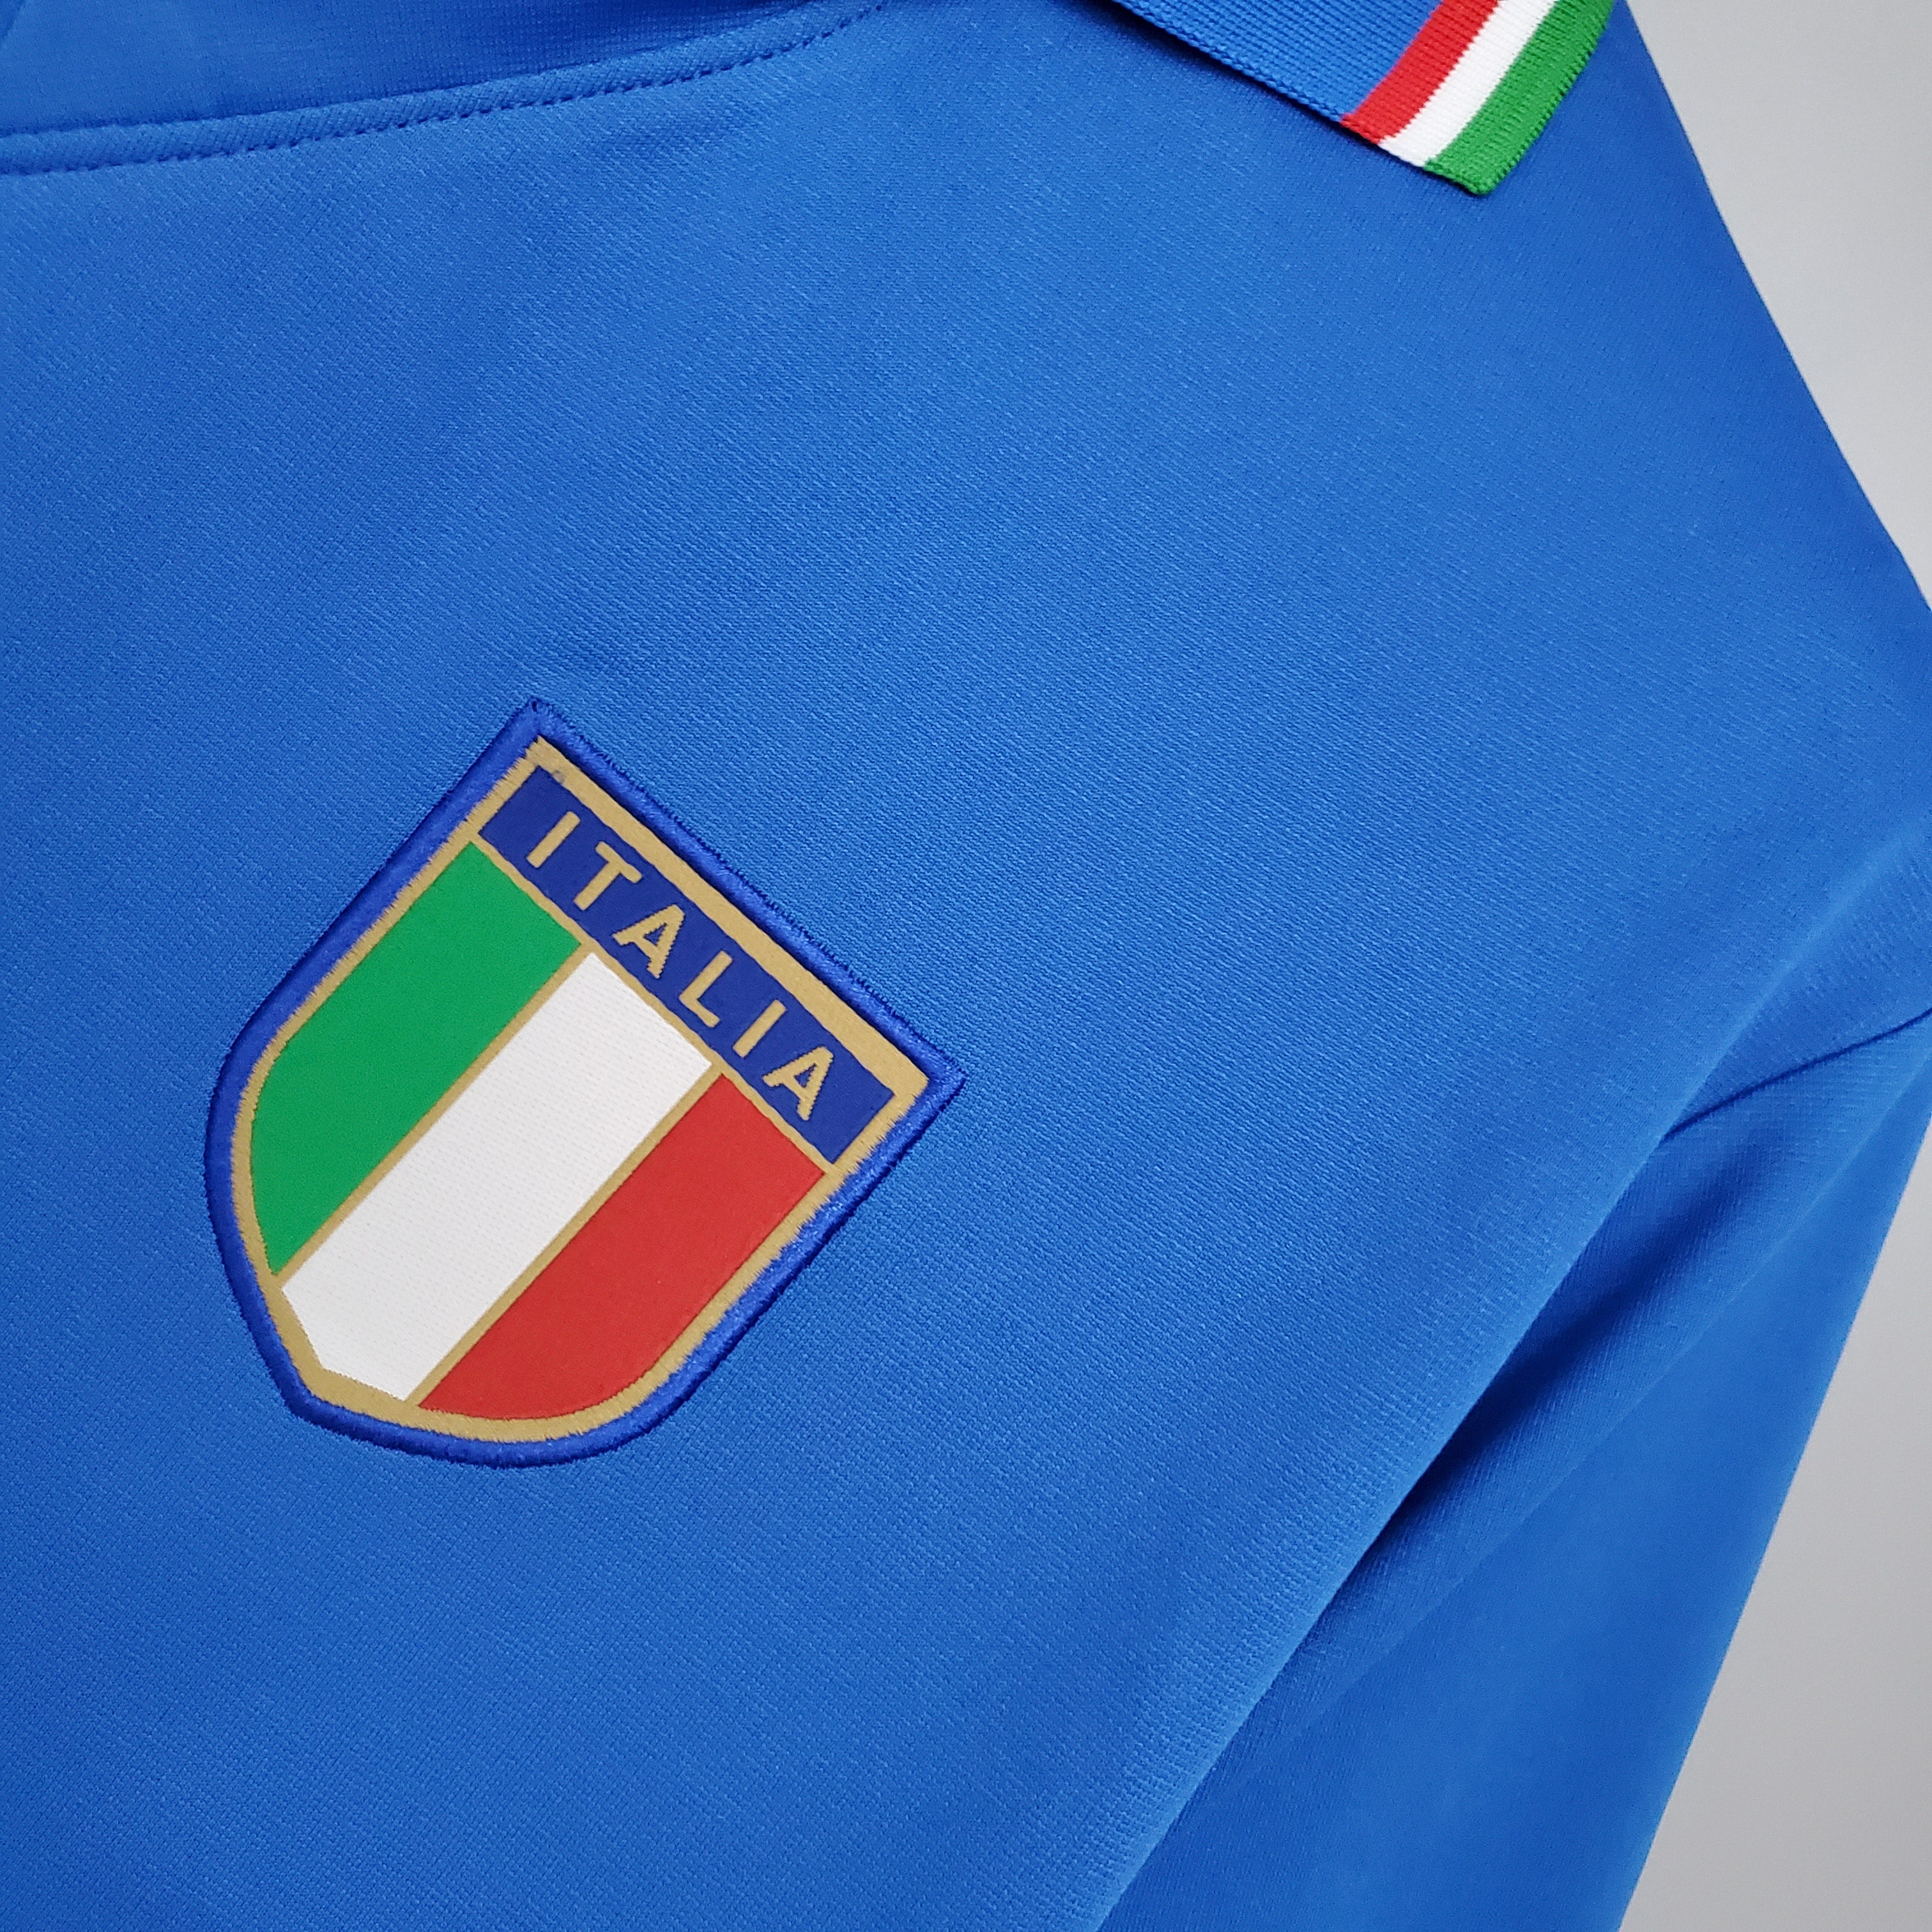 Italy 1982 World Cup Jersey